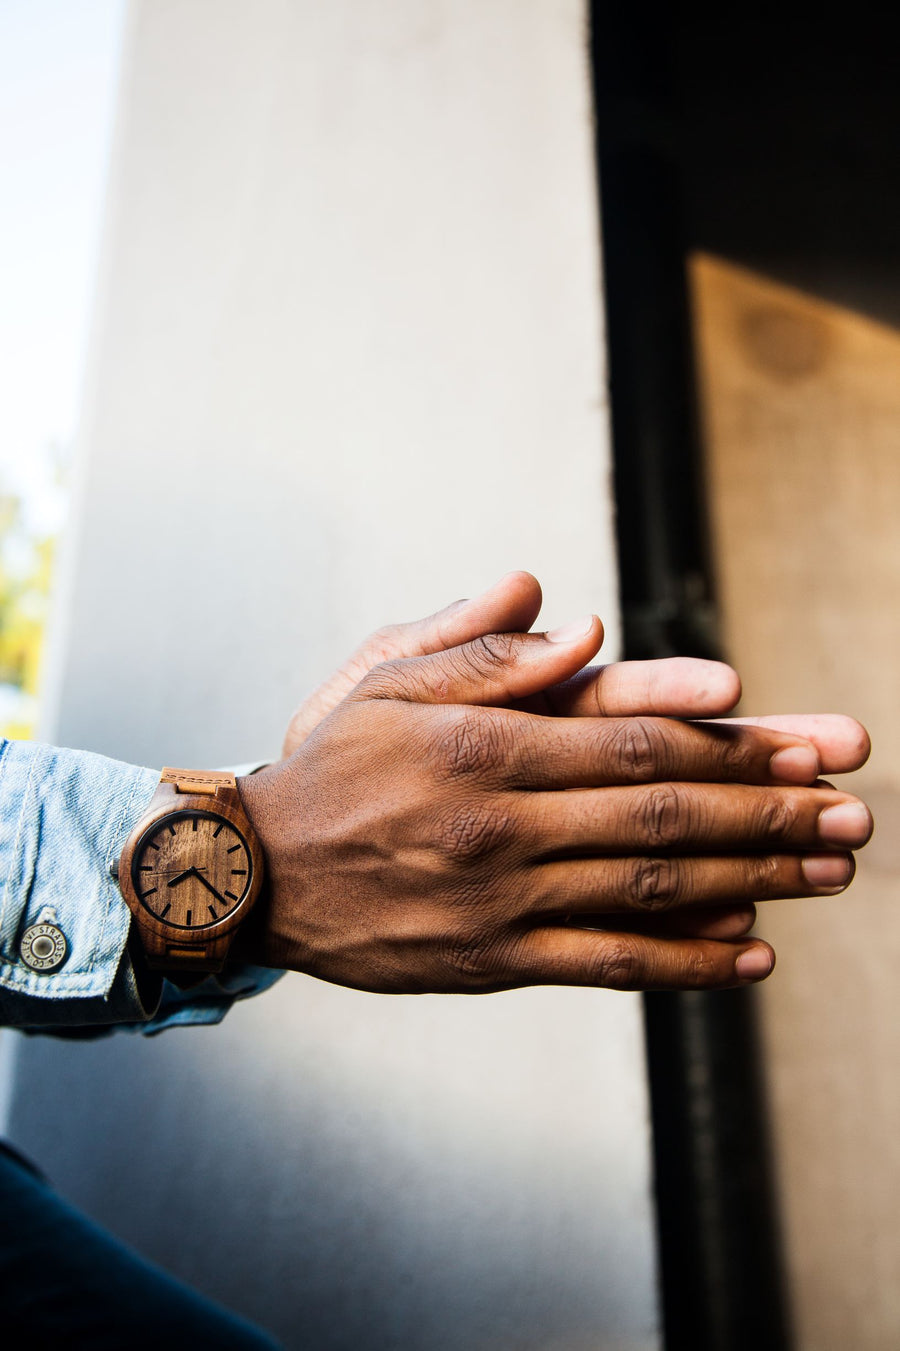 The Gibson | Wood Watch Leather Band Watches Grain and Oak